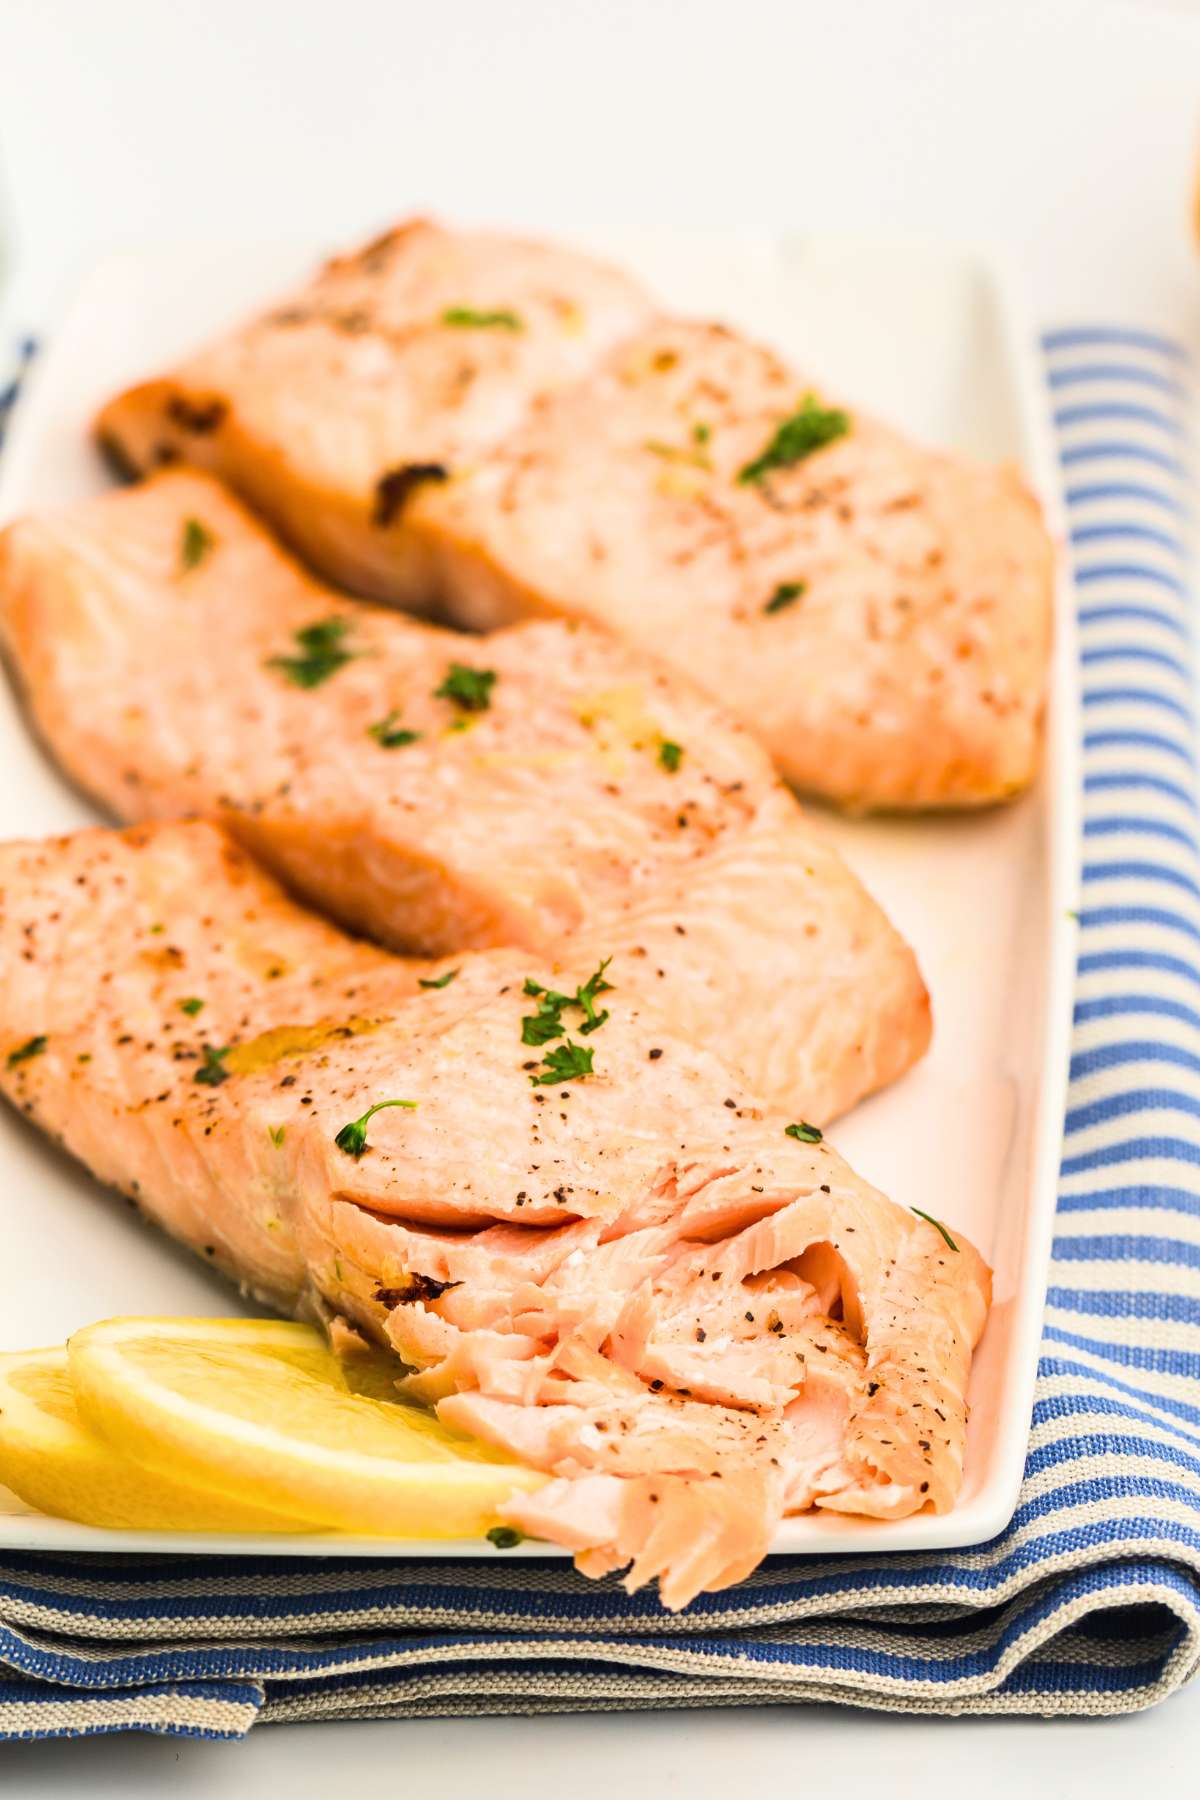 Flaked salmon filets with lemon on plate.